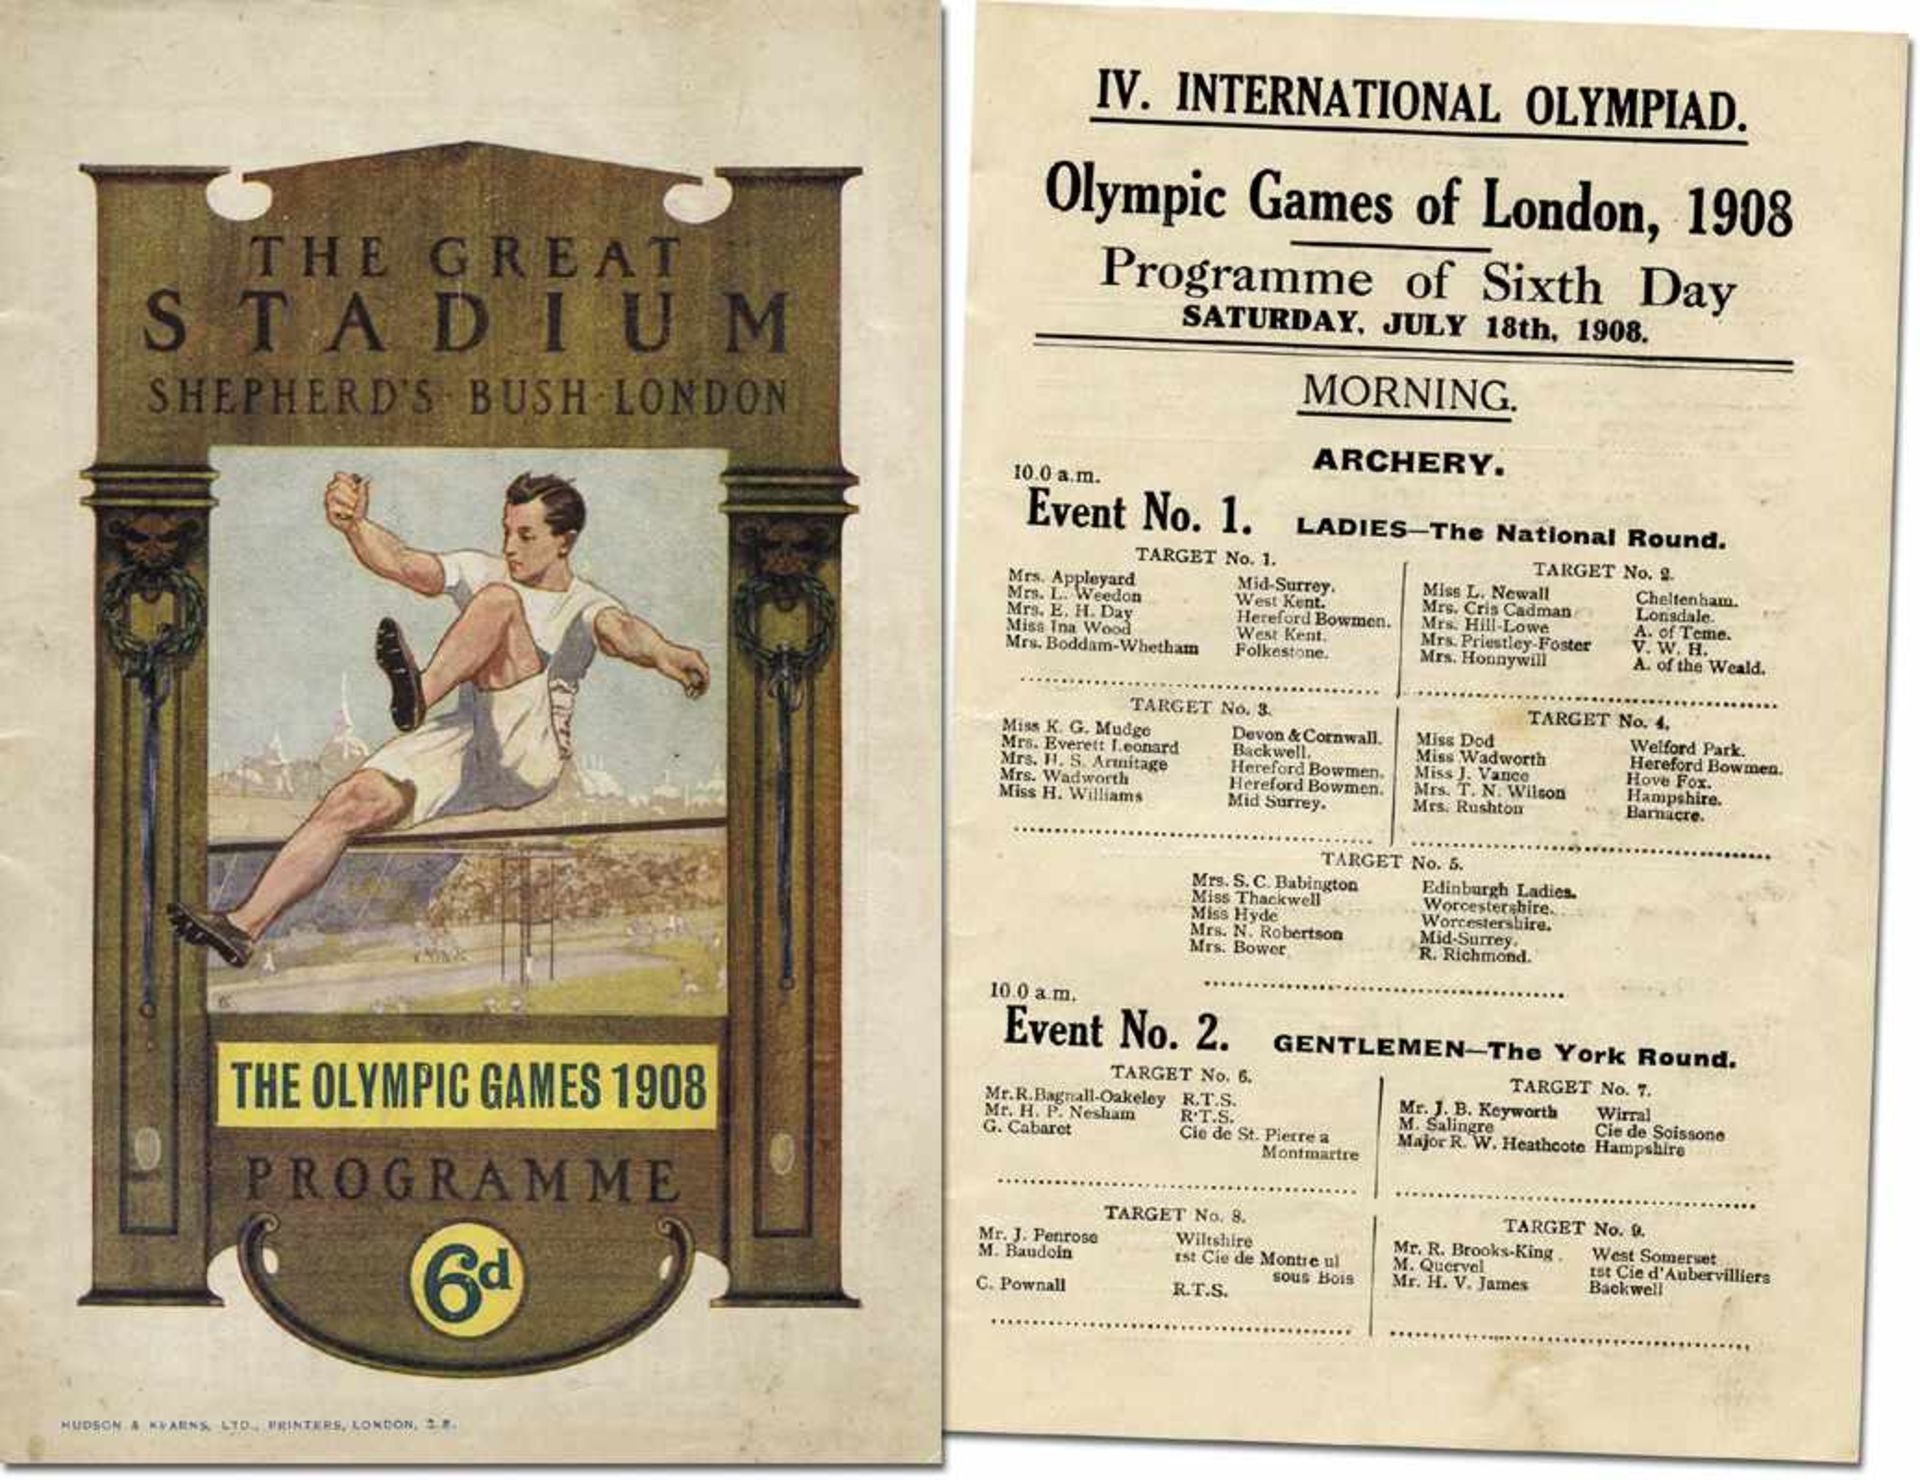 Olympic Games London 1908. Official Programm - Olympic Games of London 1908. IV.International